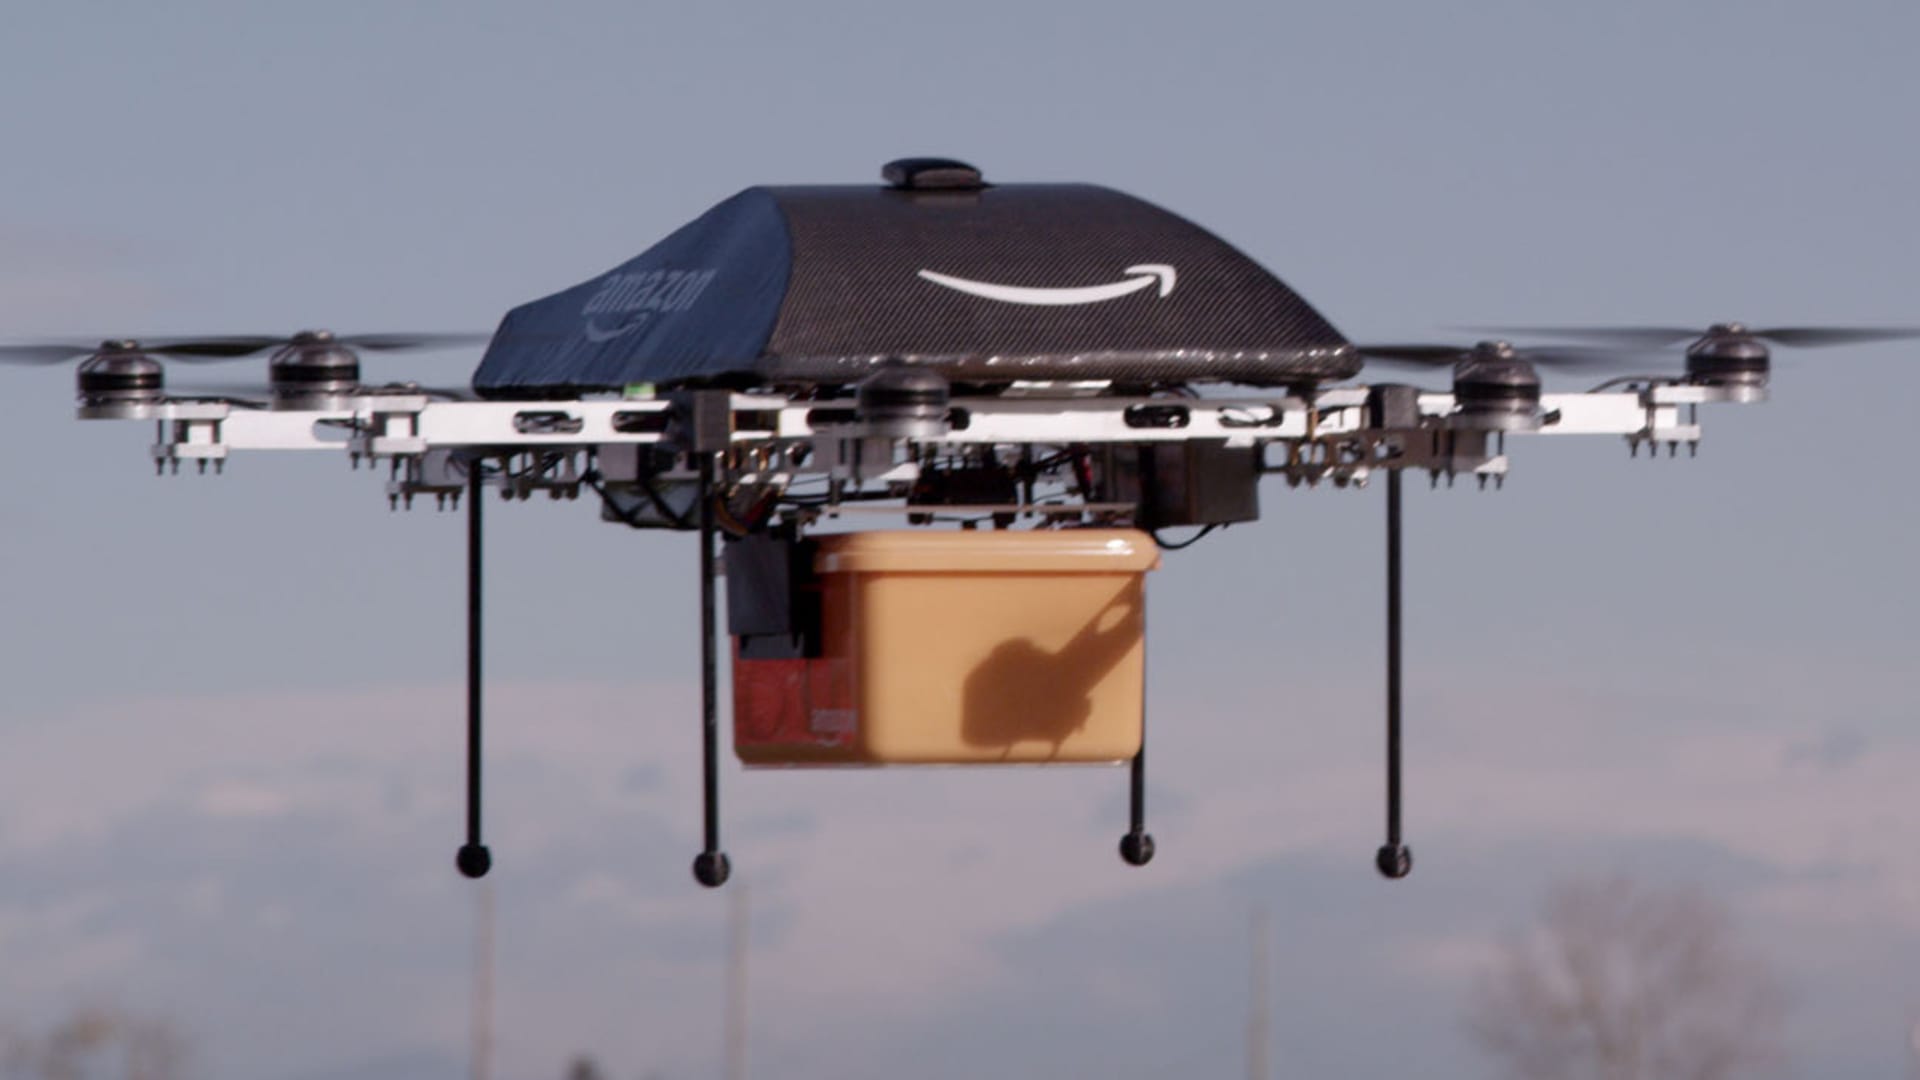 Amazon drone unit hit with layoffs as long-awaited program launches